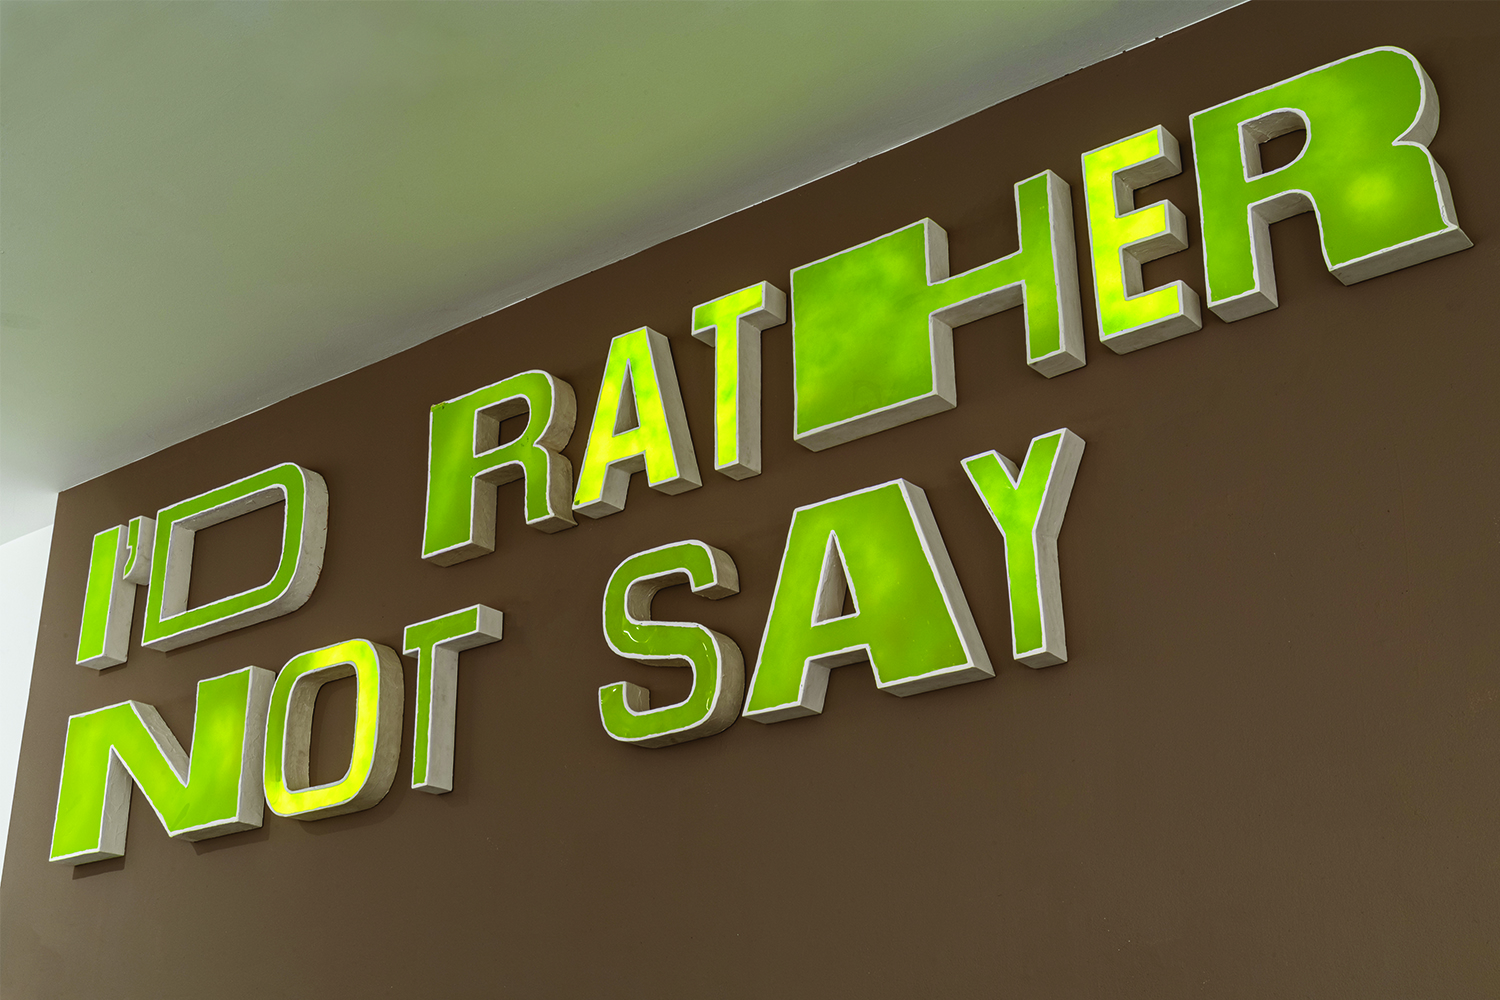 Detail of "I'D RATHER NOT SAY"